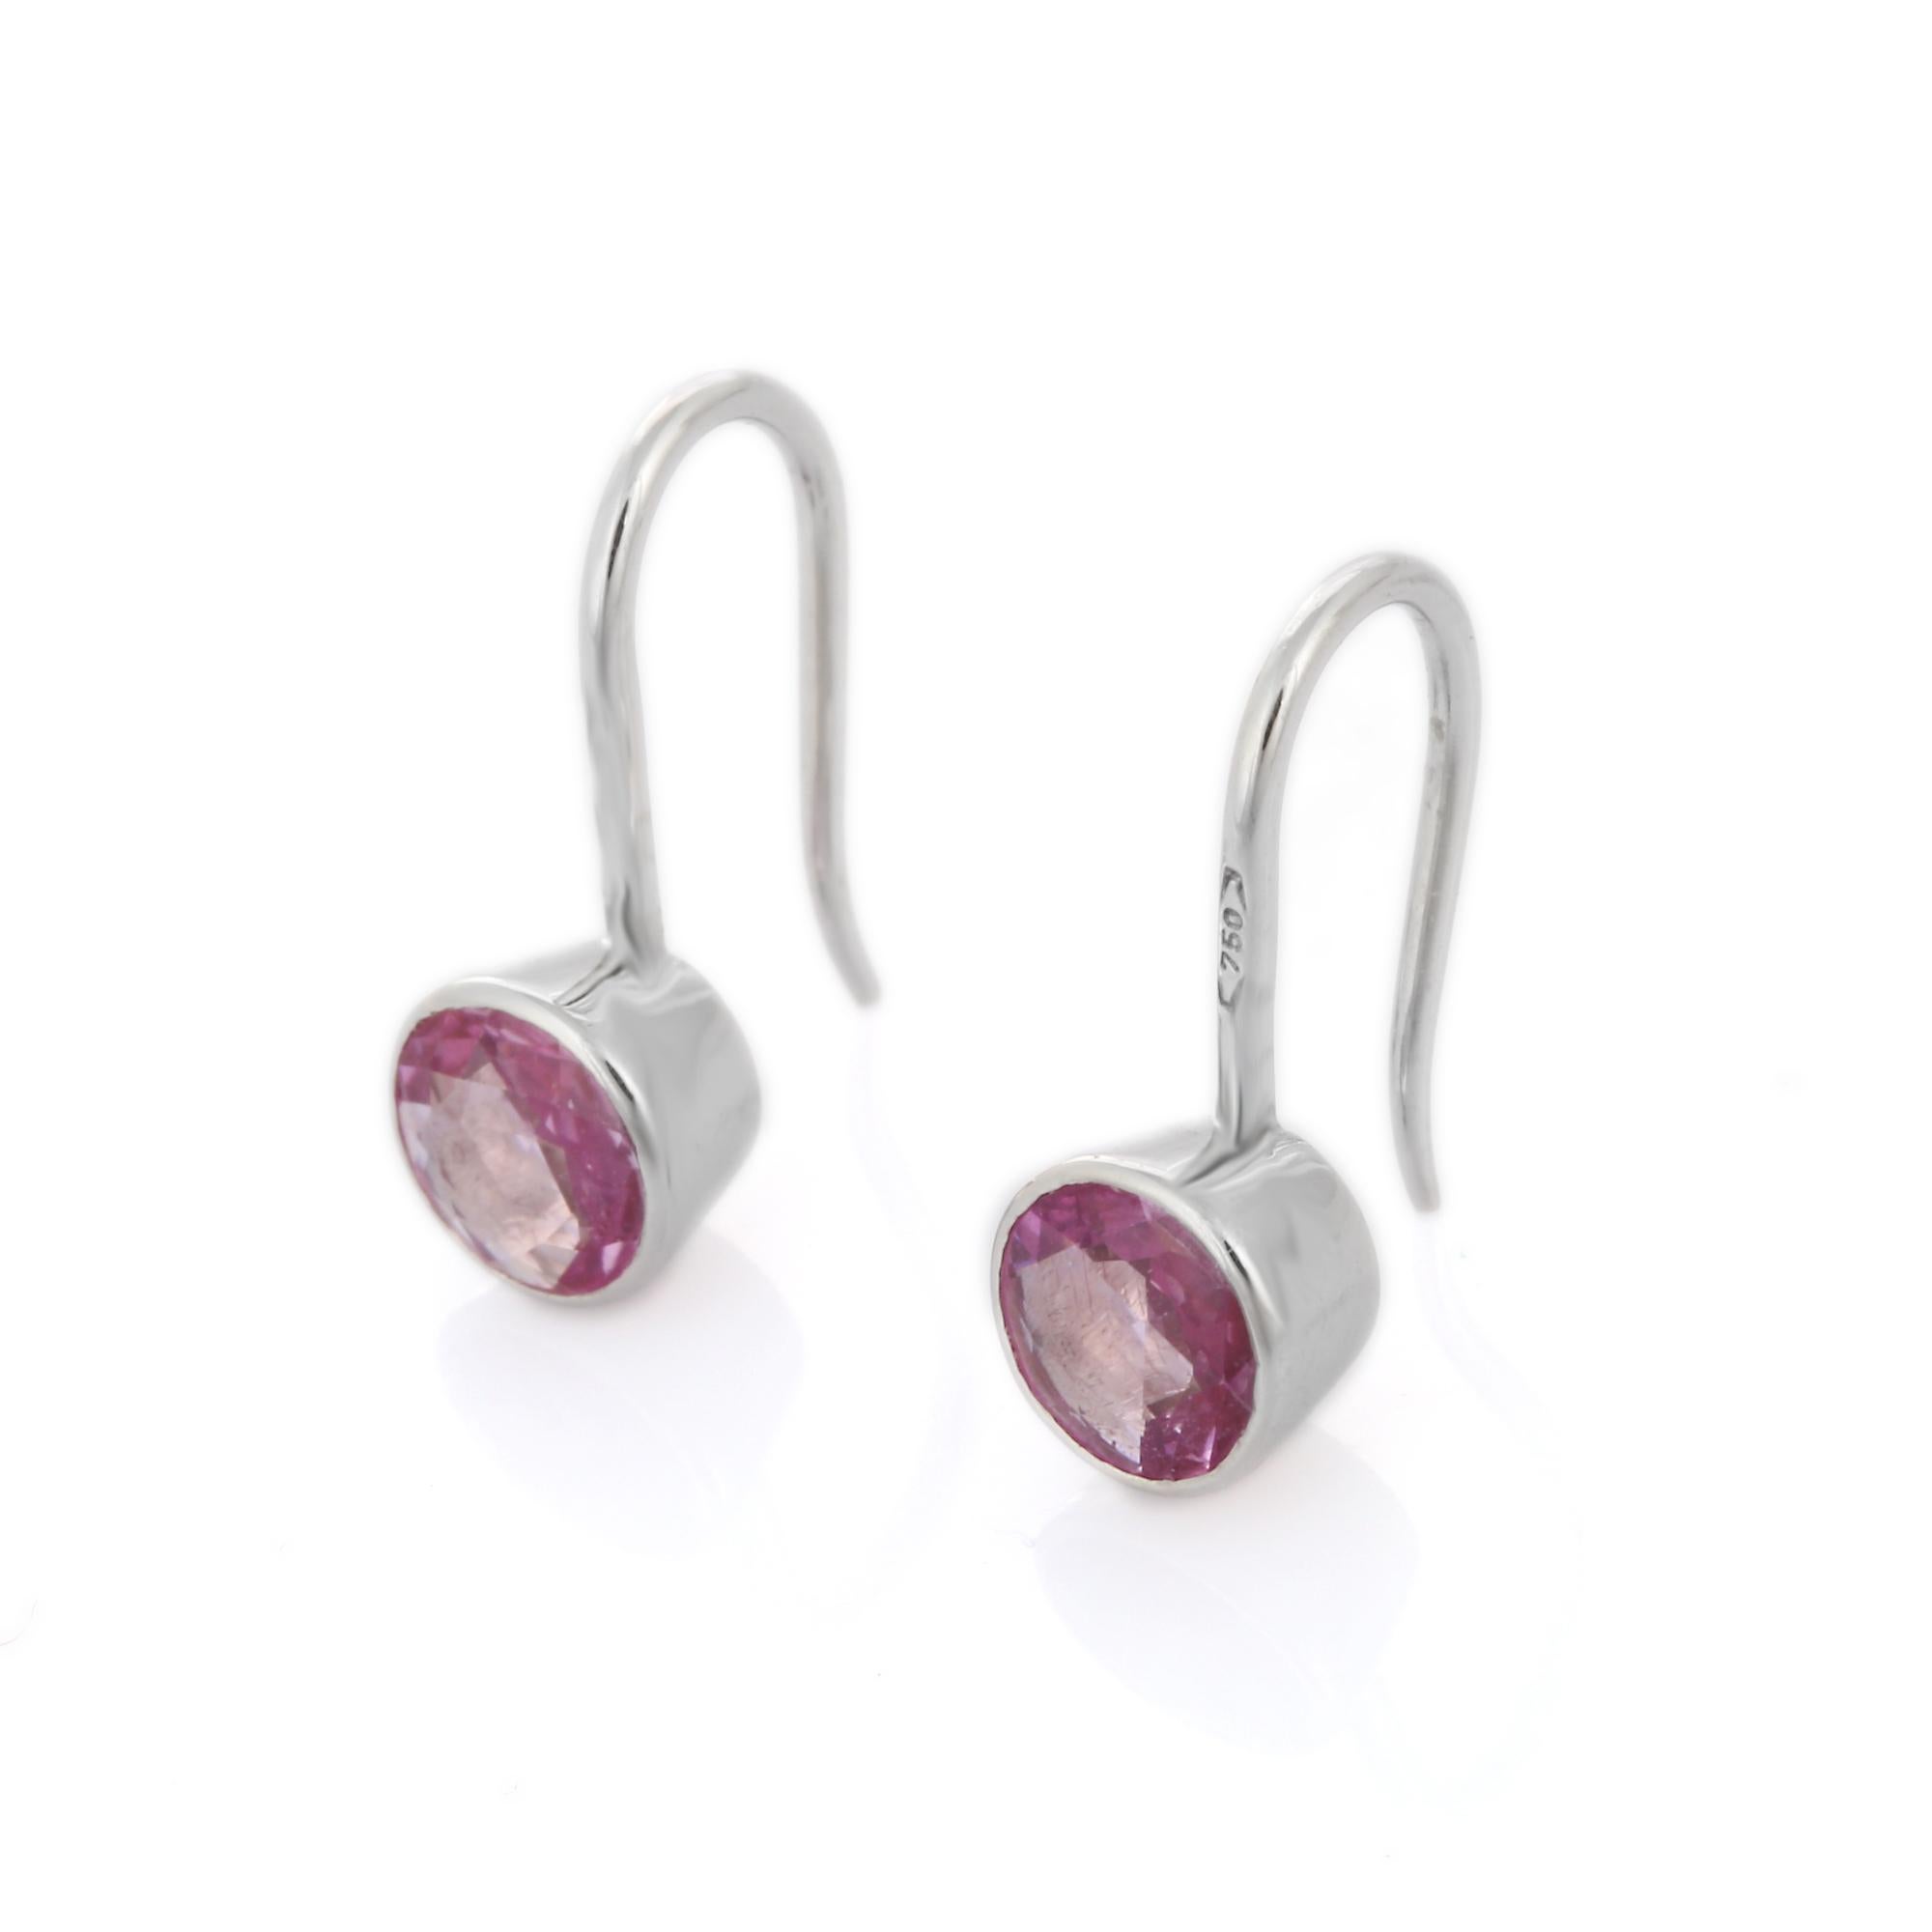 Pink Sapphire Dangle earrings to make a statement with your look. These earrings create a sparkling, luxurious look featuring round cut gemstone.
If you love to gravitate towards unique styles, this piece of jewelry is perfect for you.

PRODUCT